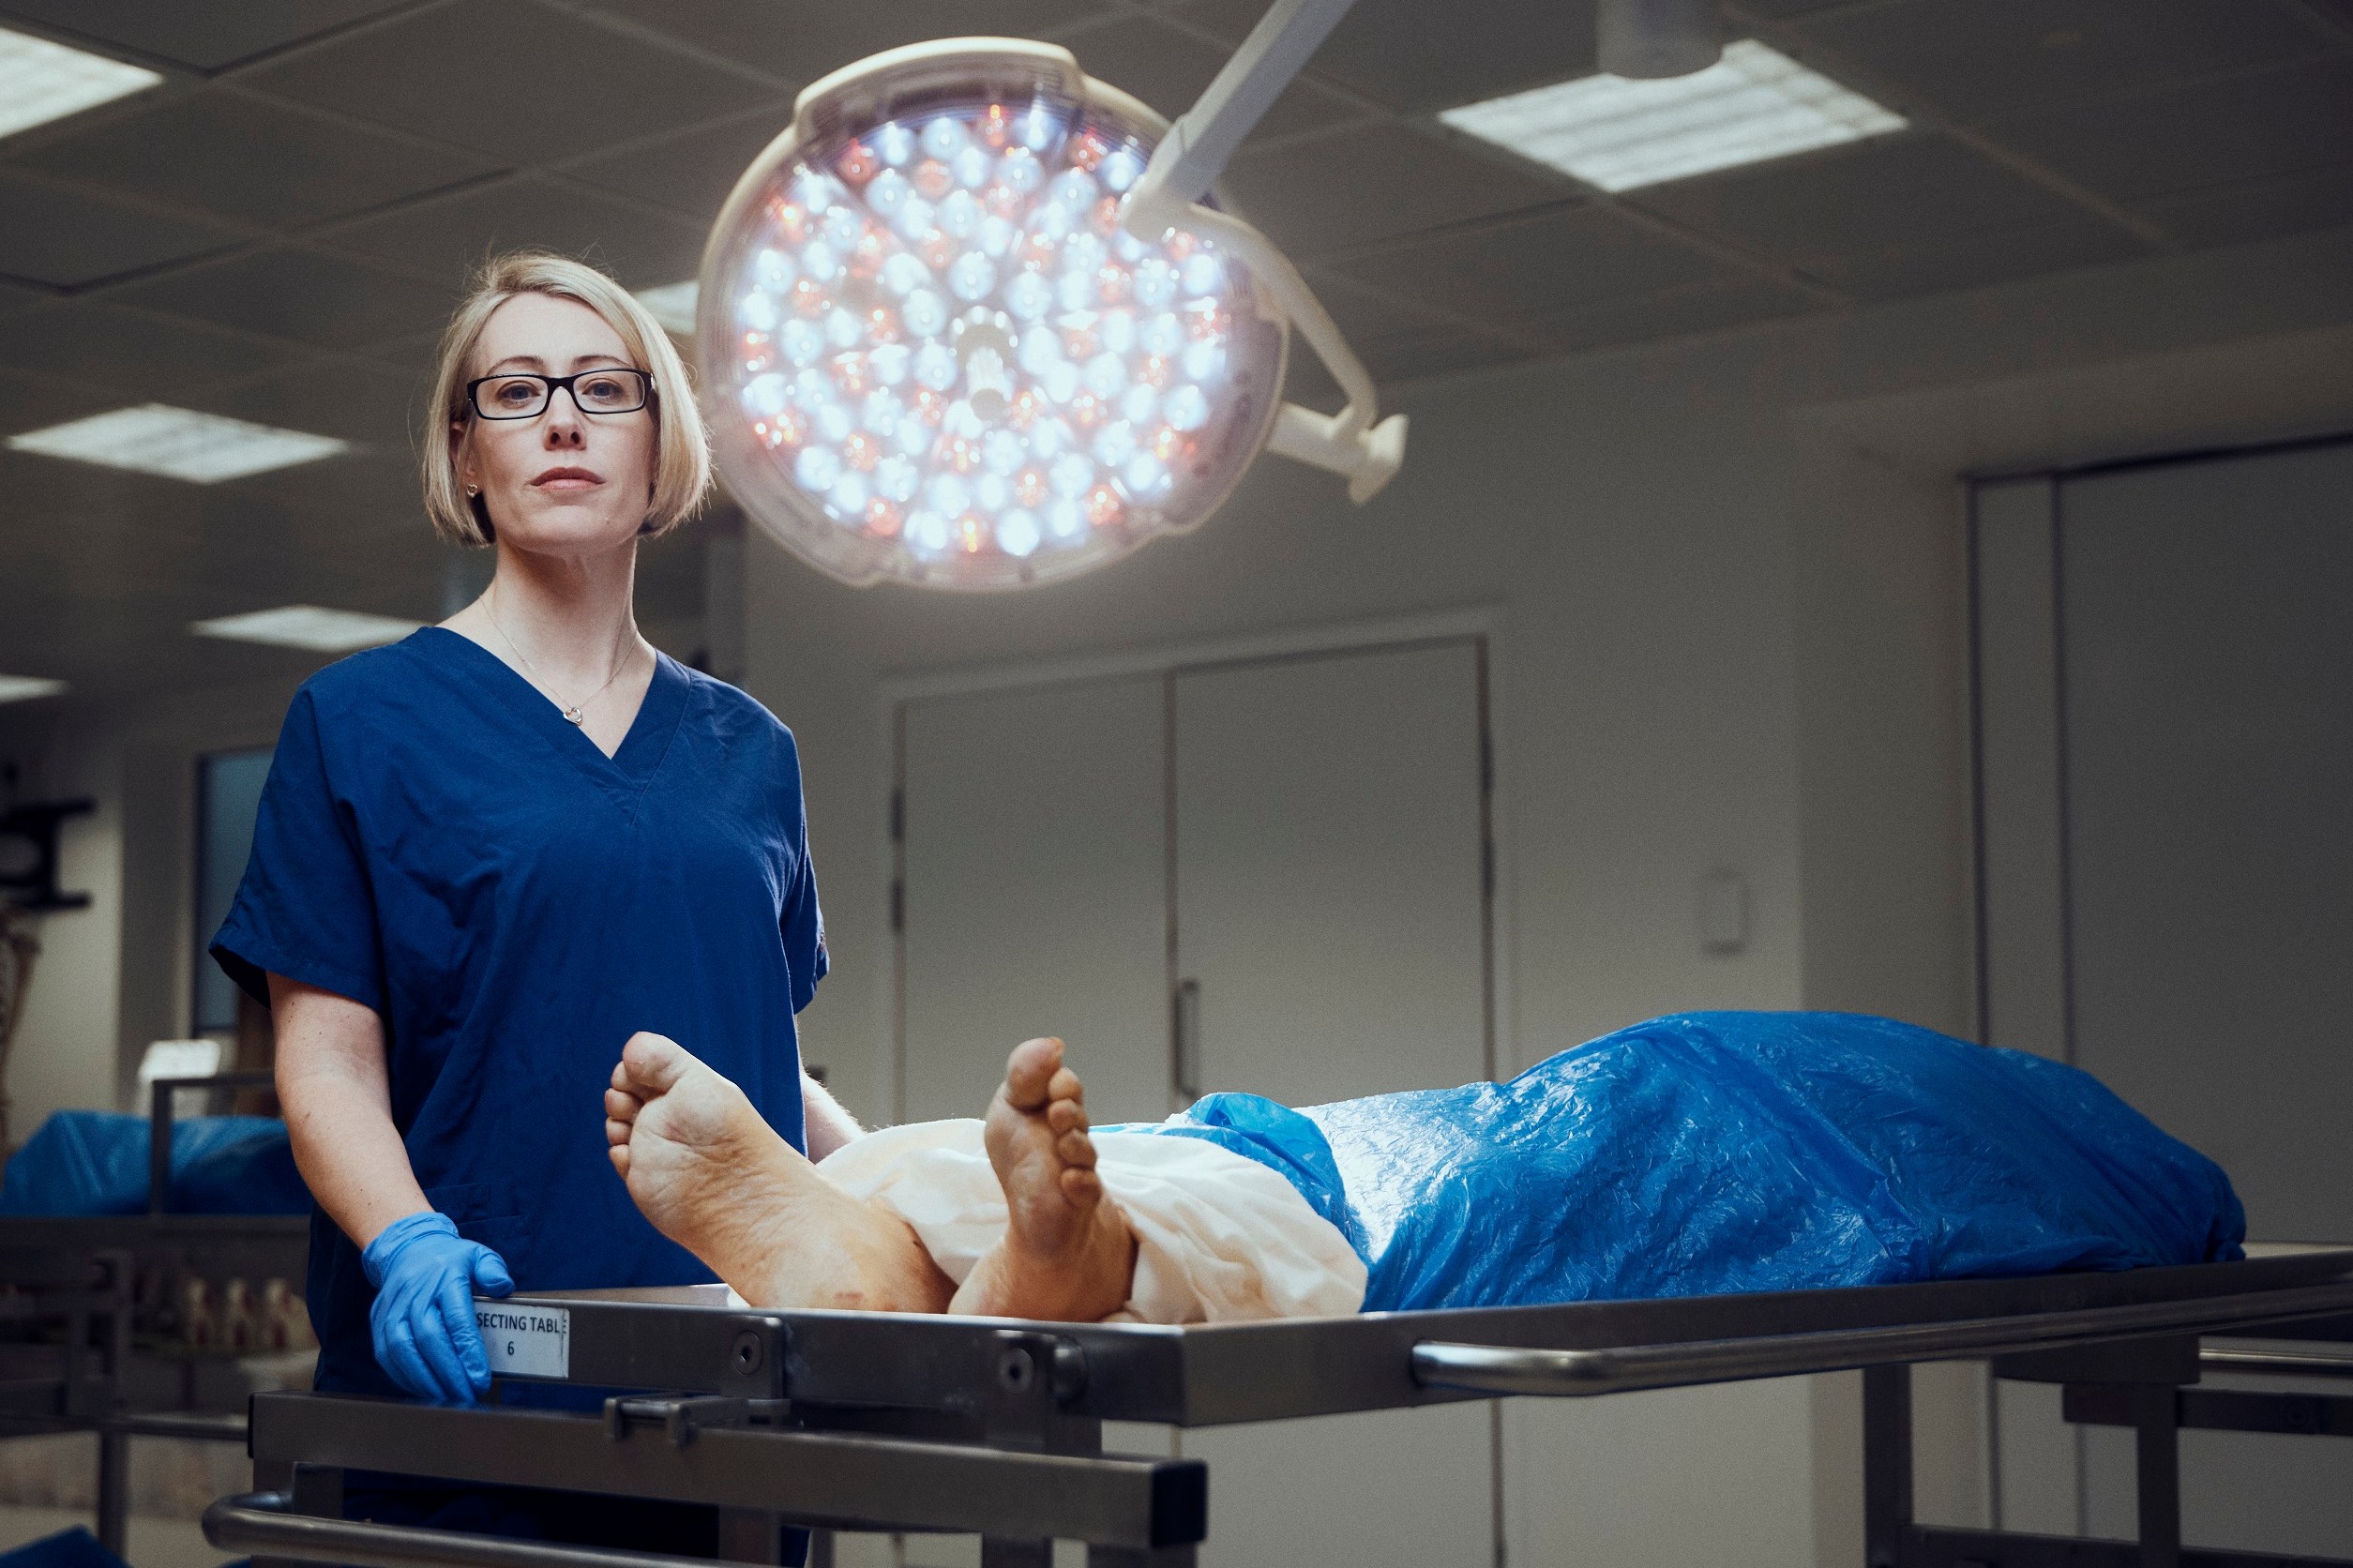 Professor Claire Smith in the main dissection room at Sussex University with a donated body. Under the auspices of the Human Tissue Authority, the donor pictured consented to anatomical examination and public display. The donor consented to images being taken